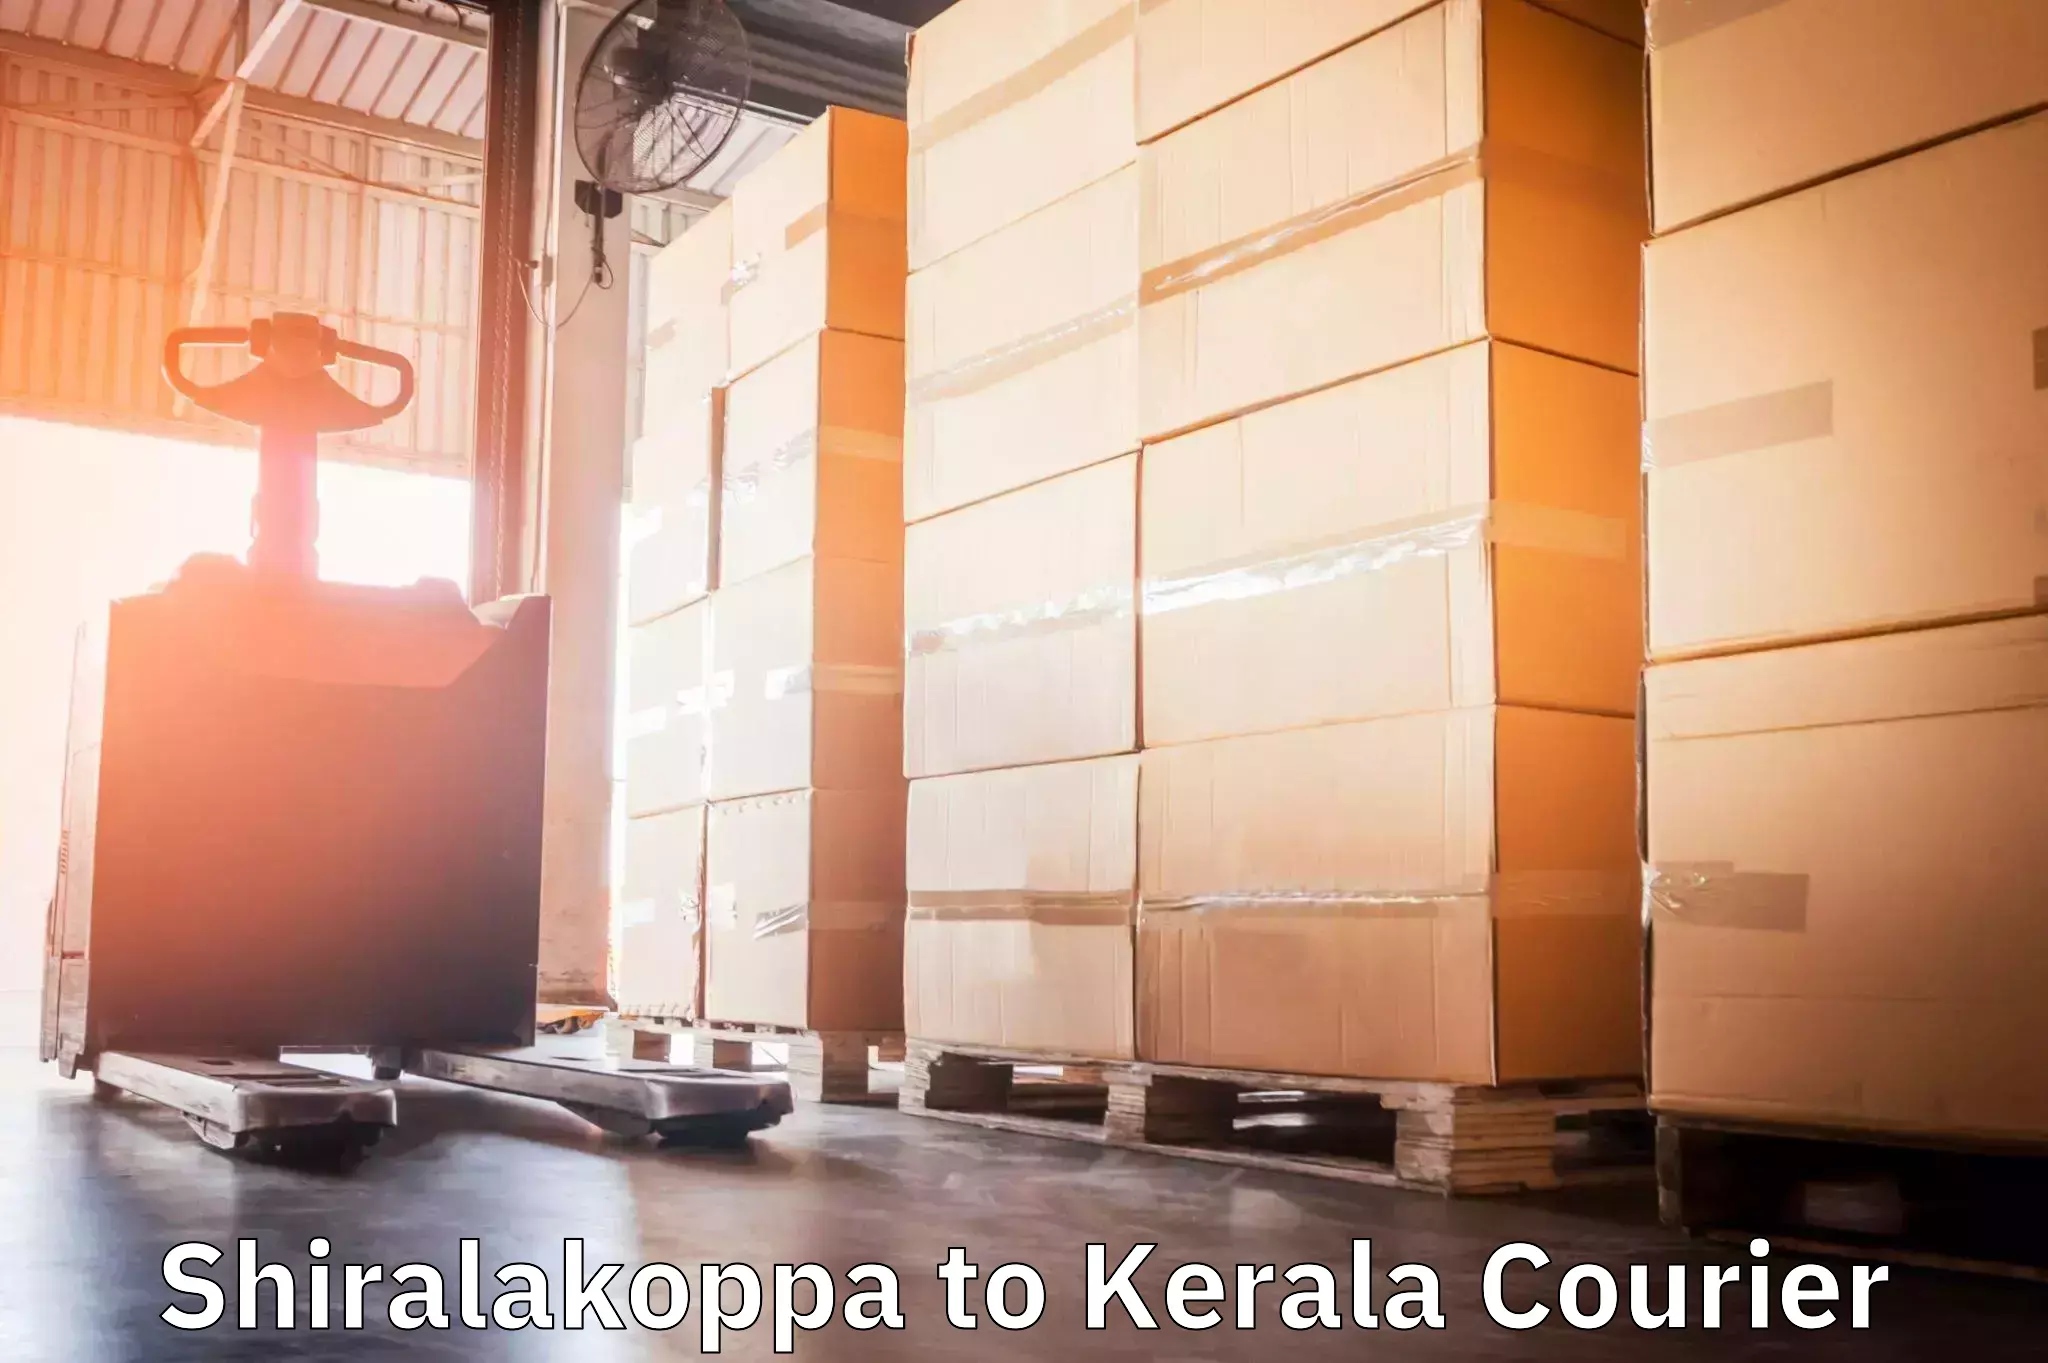 Cash on delivery service Shiralakoppa to Kerala